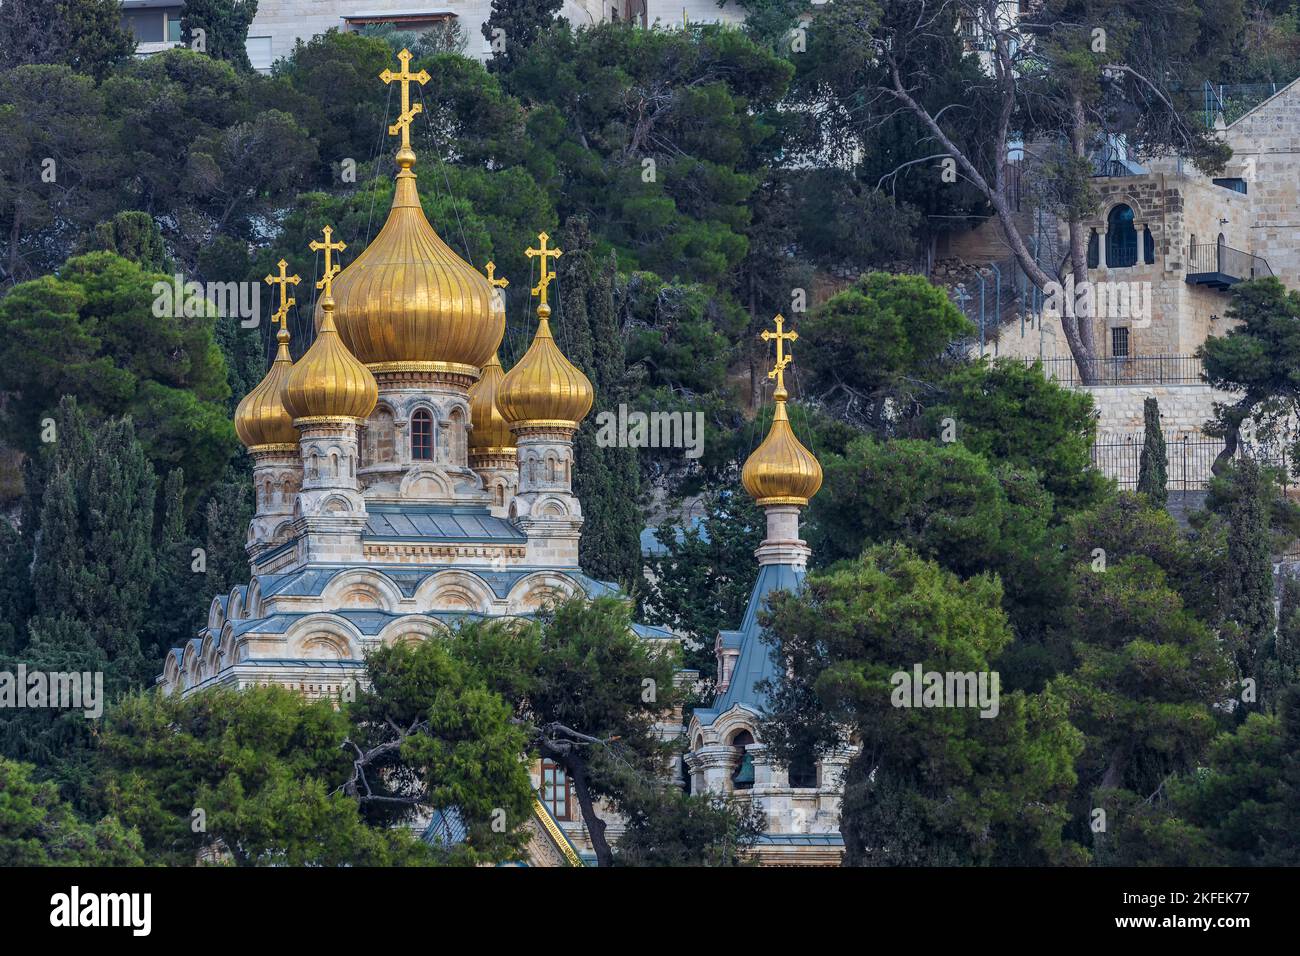 SRAEL,Jerusalem  05, 2022: Domes of the Church of St. Mary Magdalene in Israel Stock Photo